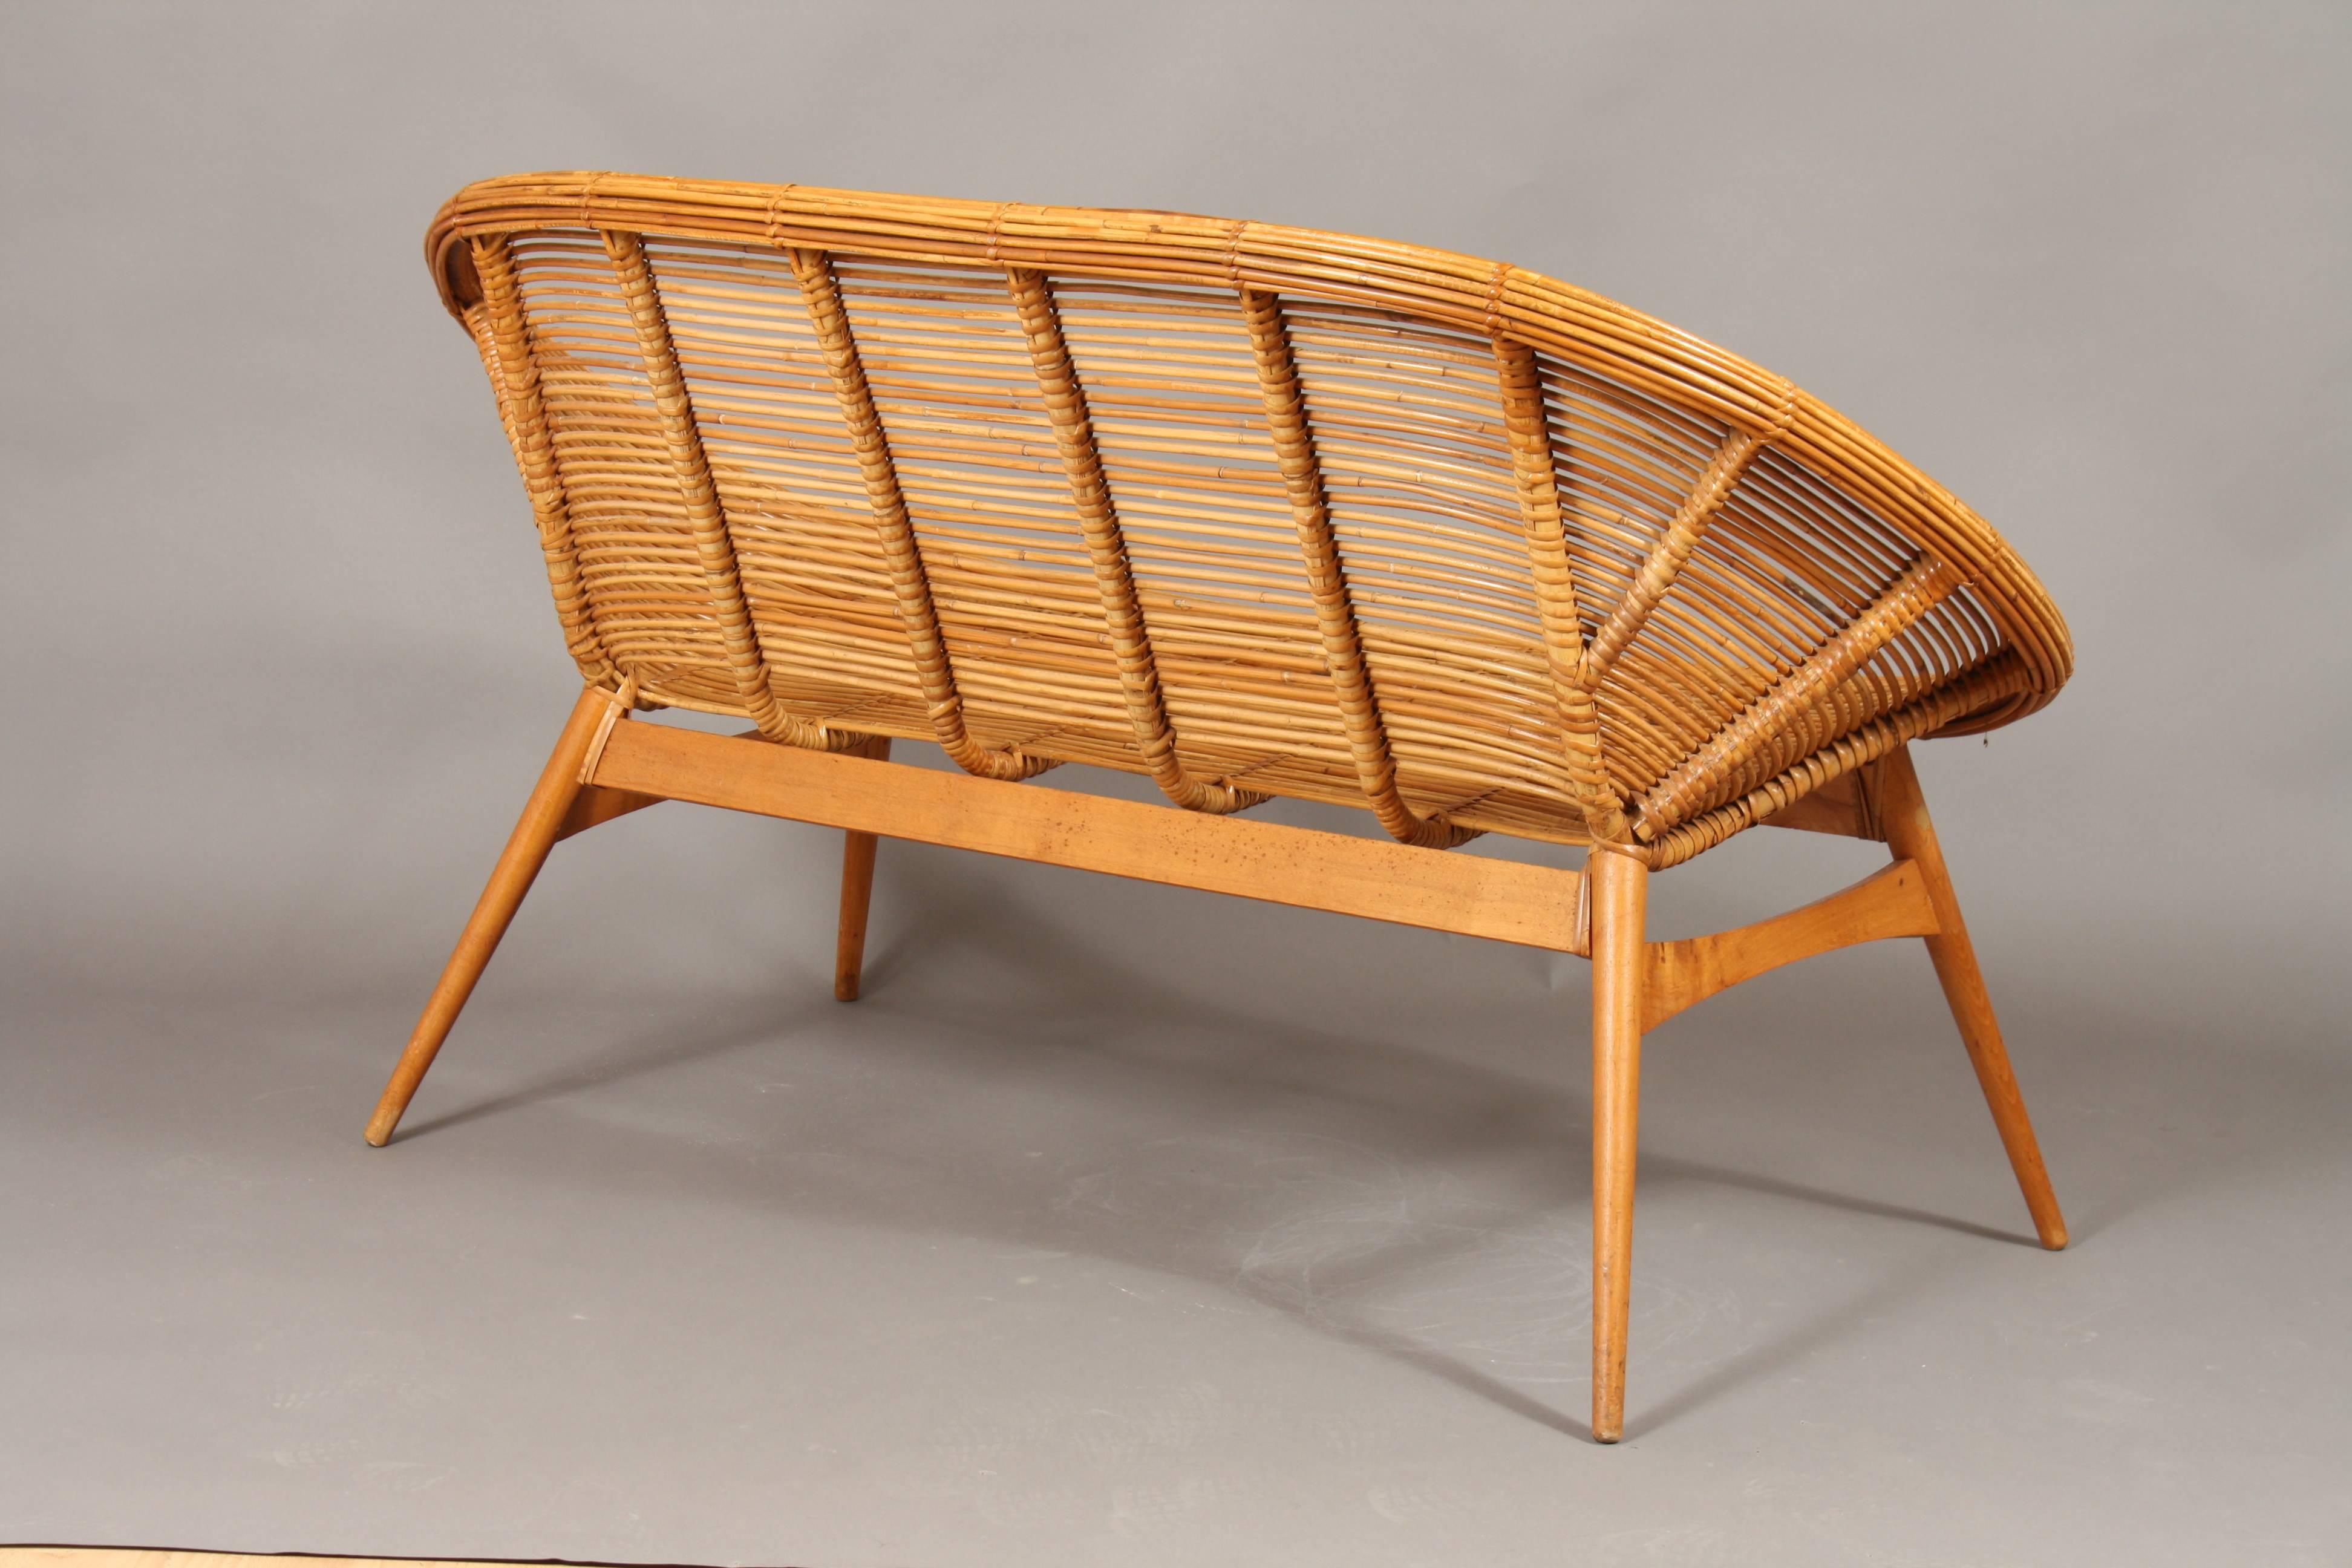 1960s Wicker Sofa with Teak Frame, Design from DDR 1